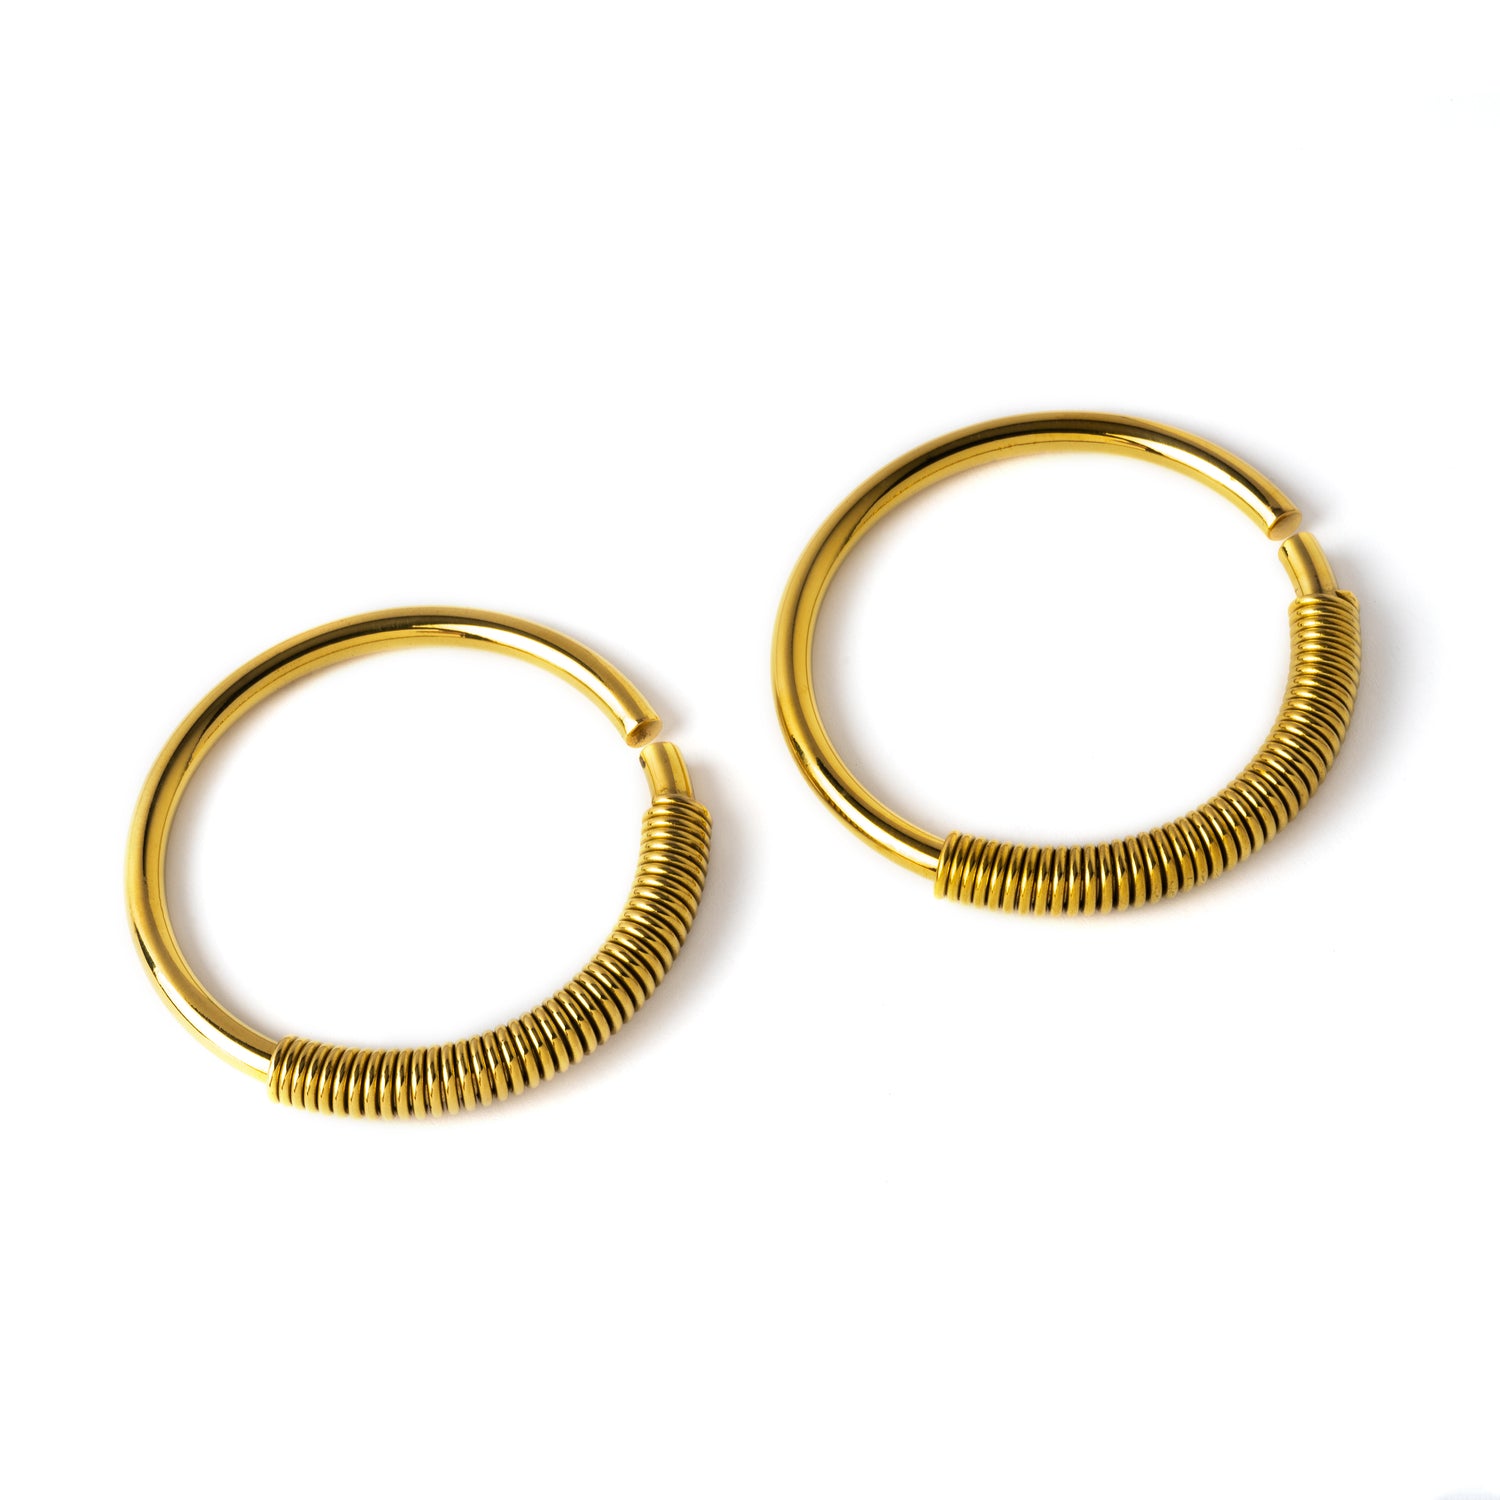 pair of gold brass large hoops gauges with coiled wire ornament right front view